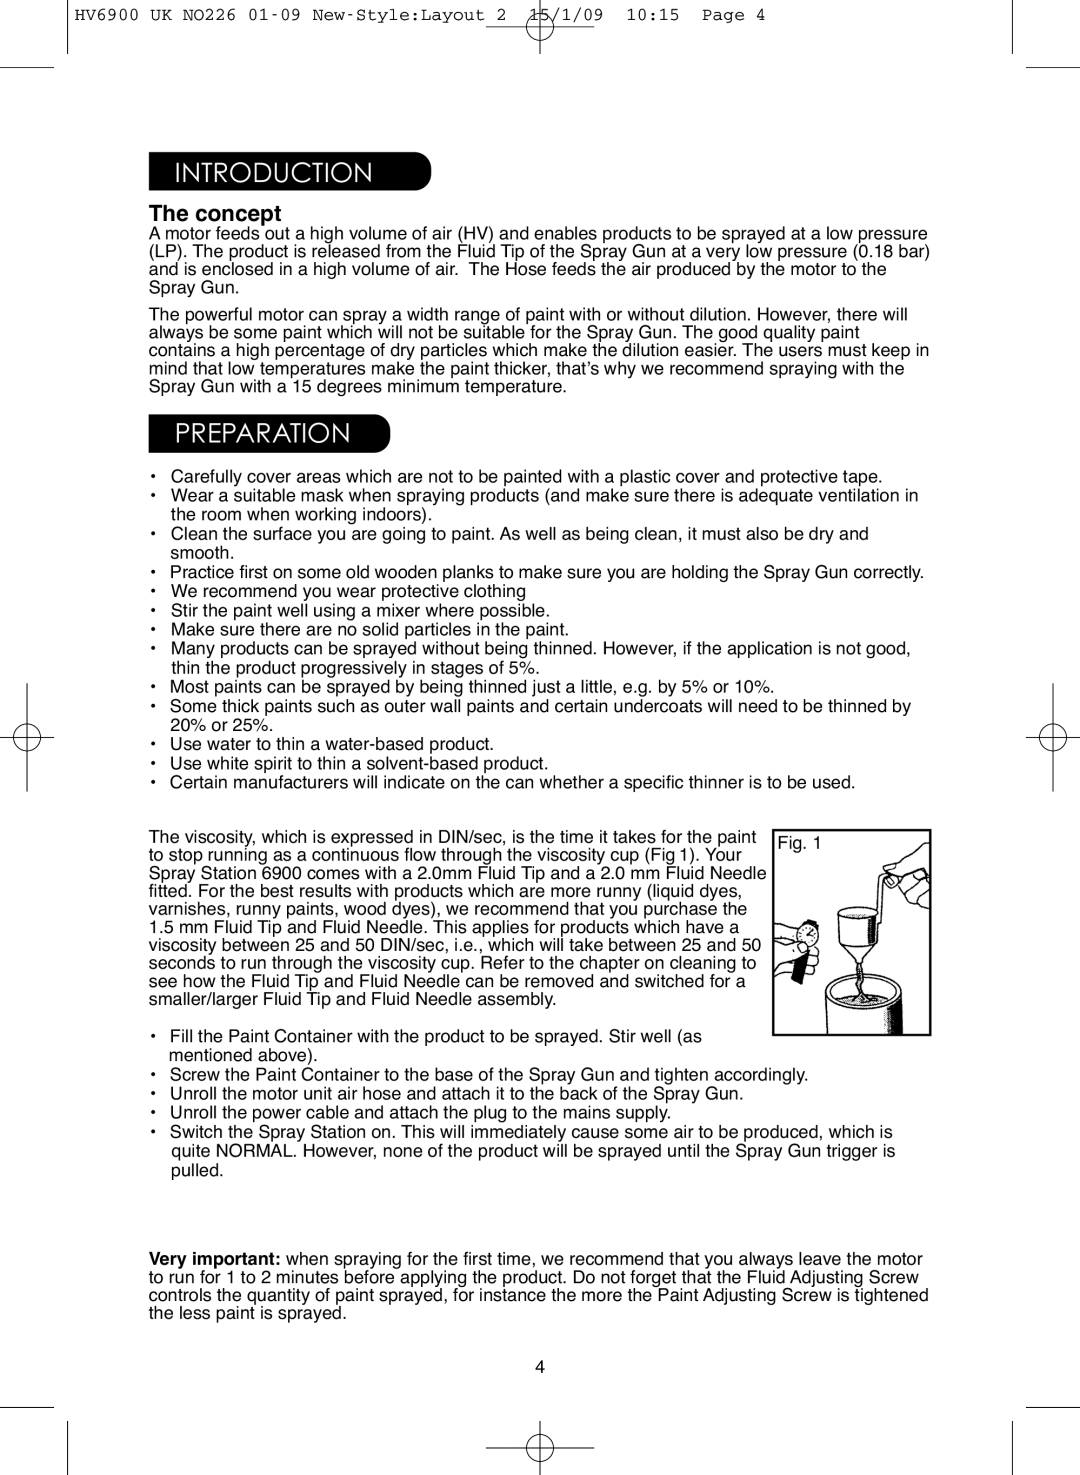 Earlex 6900 instruction manual Introduction, Preparation, The concept 